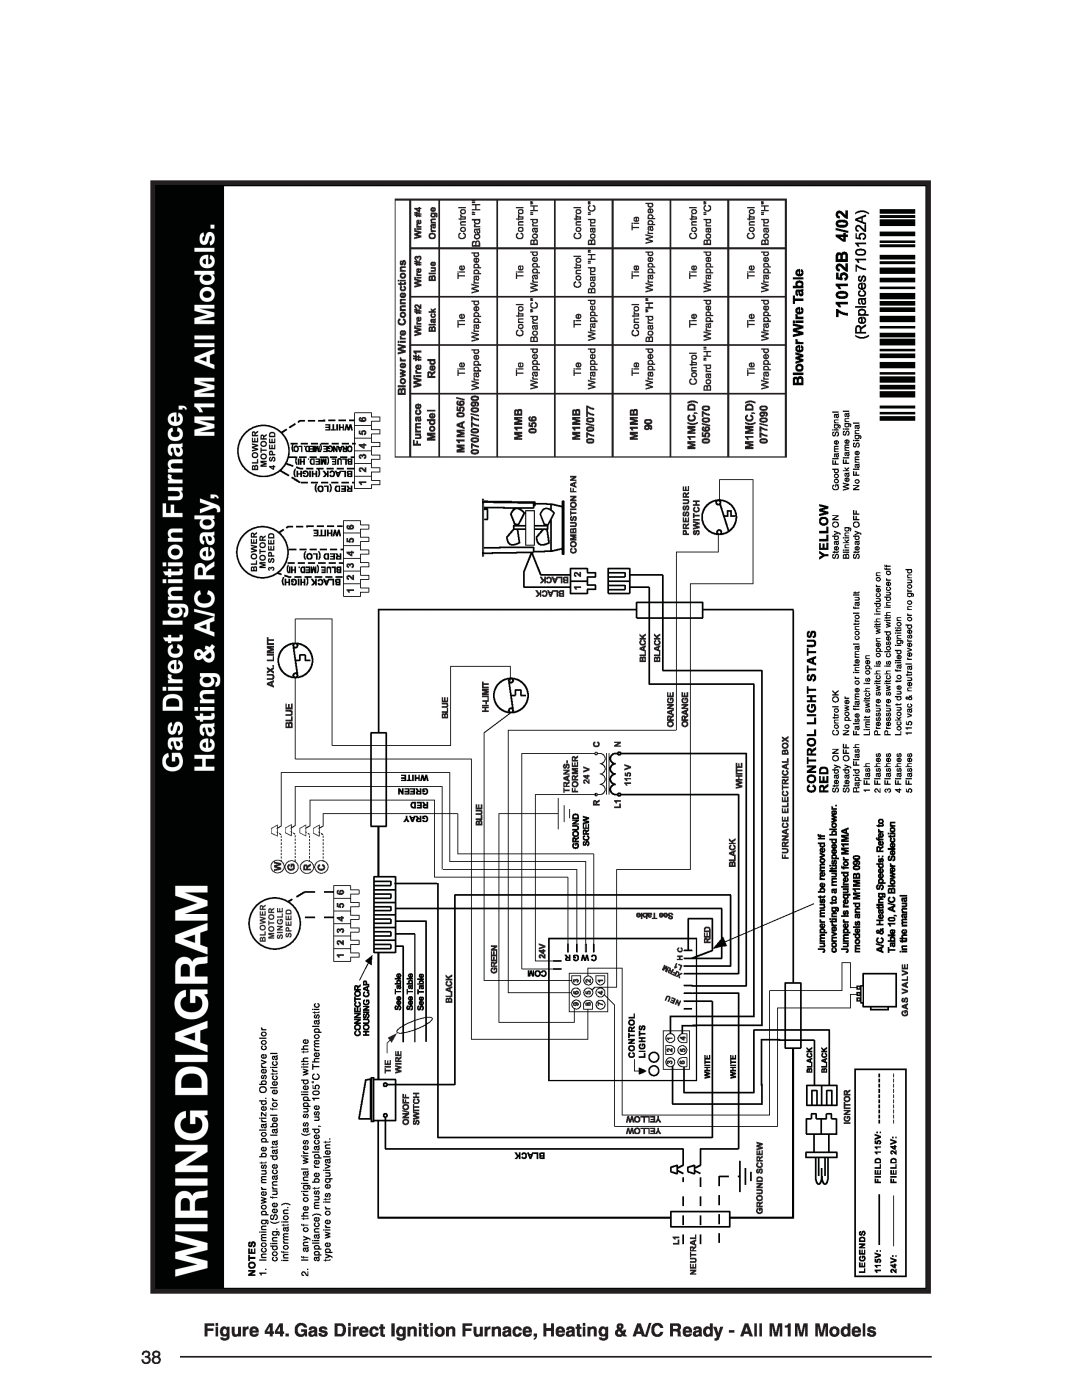 Nordyne SERIES M1B, AND M5S installation instructions Wiring Diagram, Steady ON 